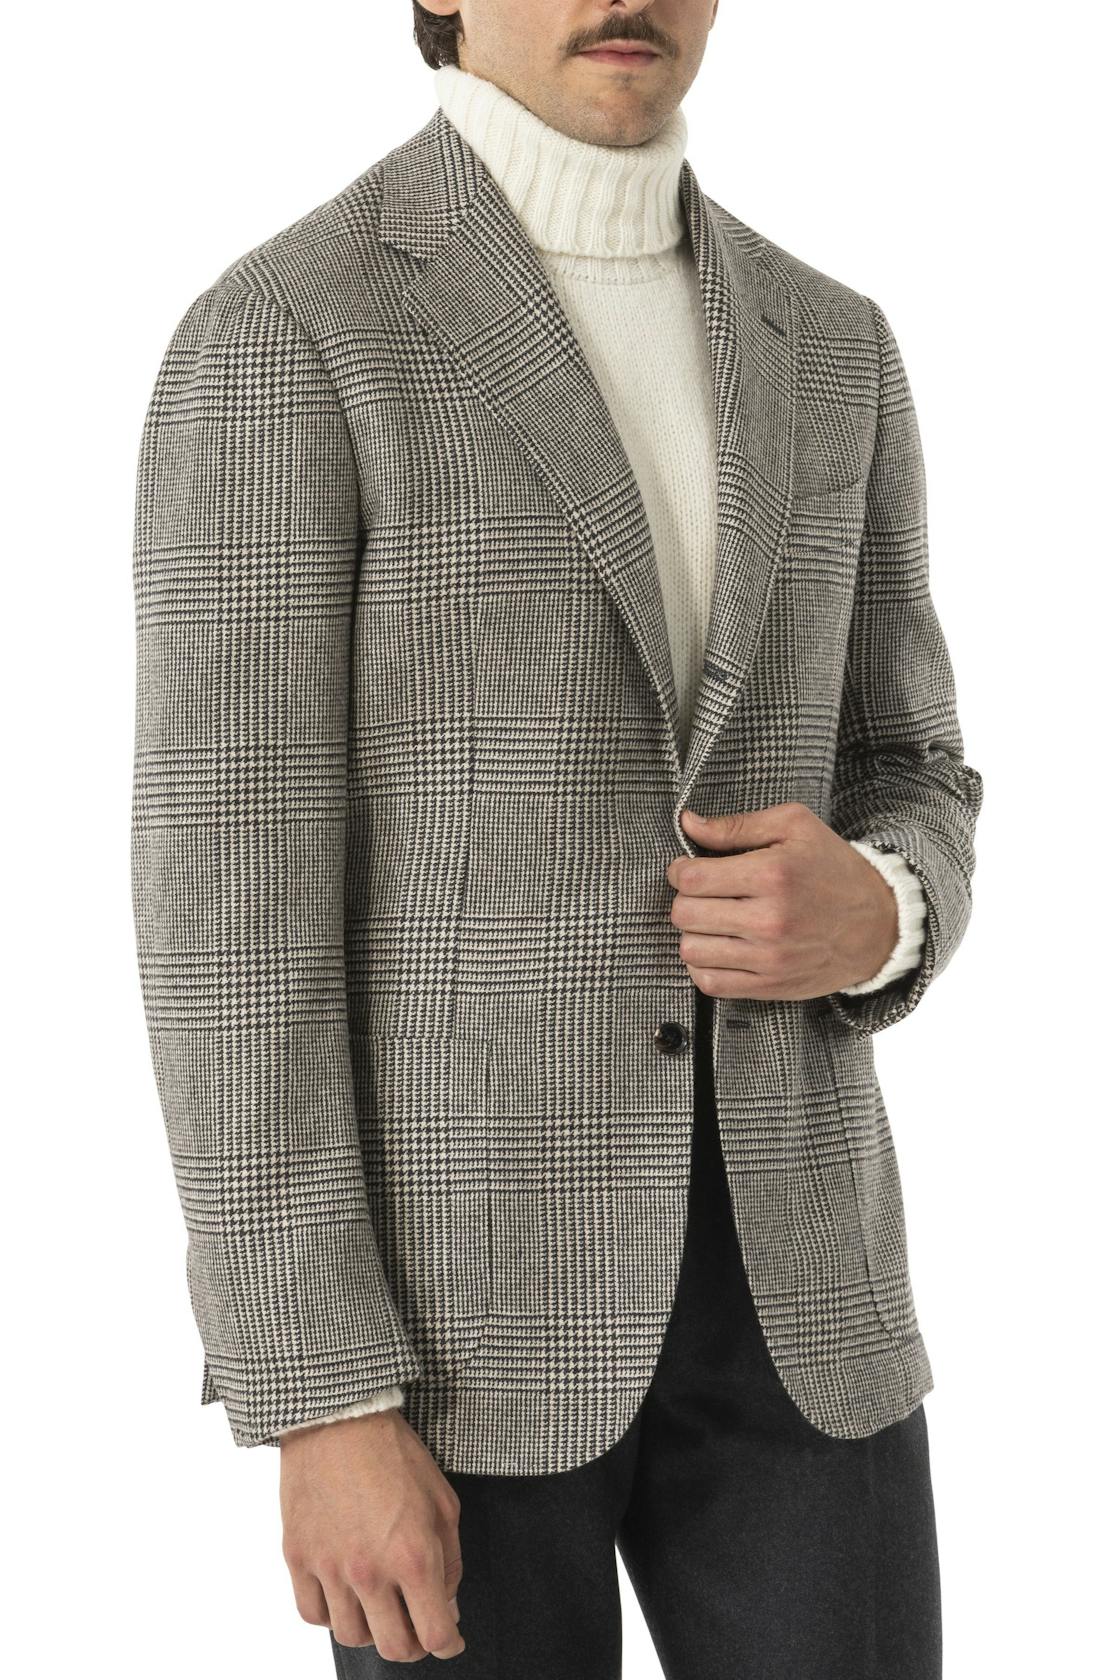 The Armoury by Ring Jacket Model 3 Cashmere Cream Charcoal Prince of Wales Check Sport Coat